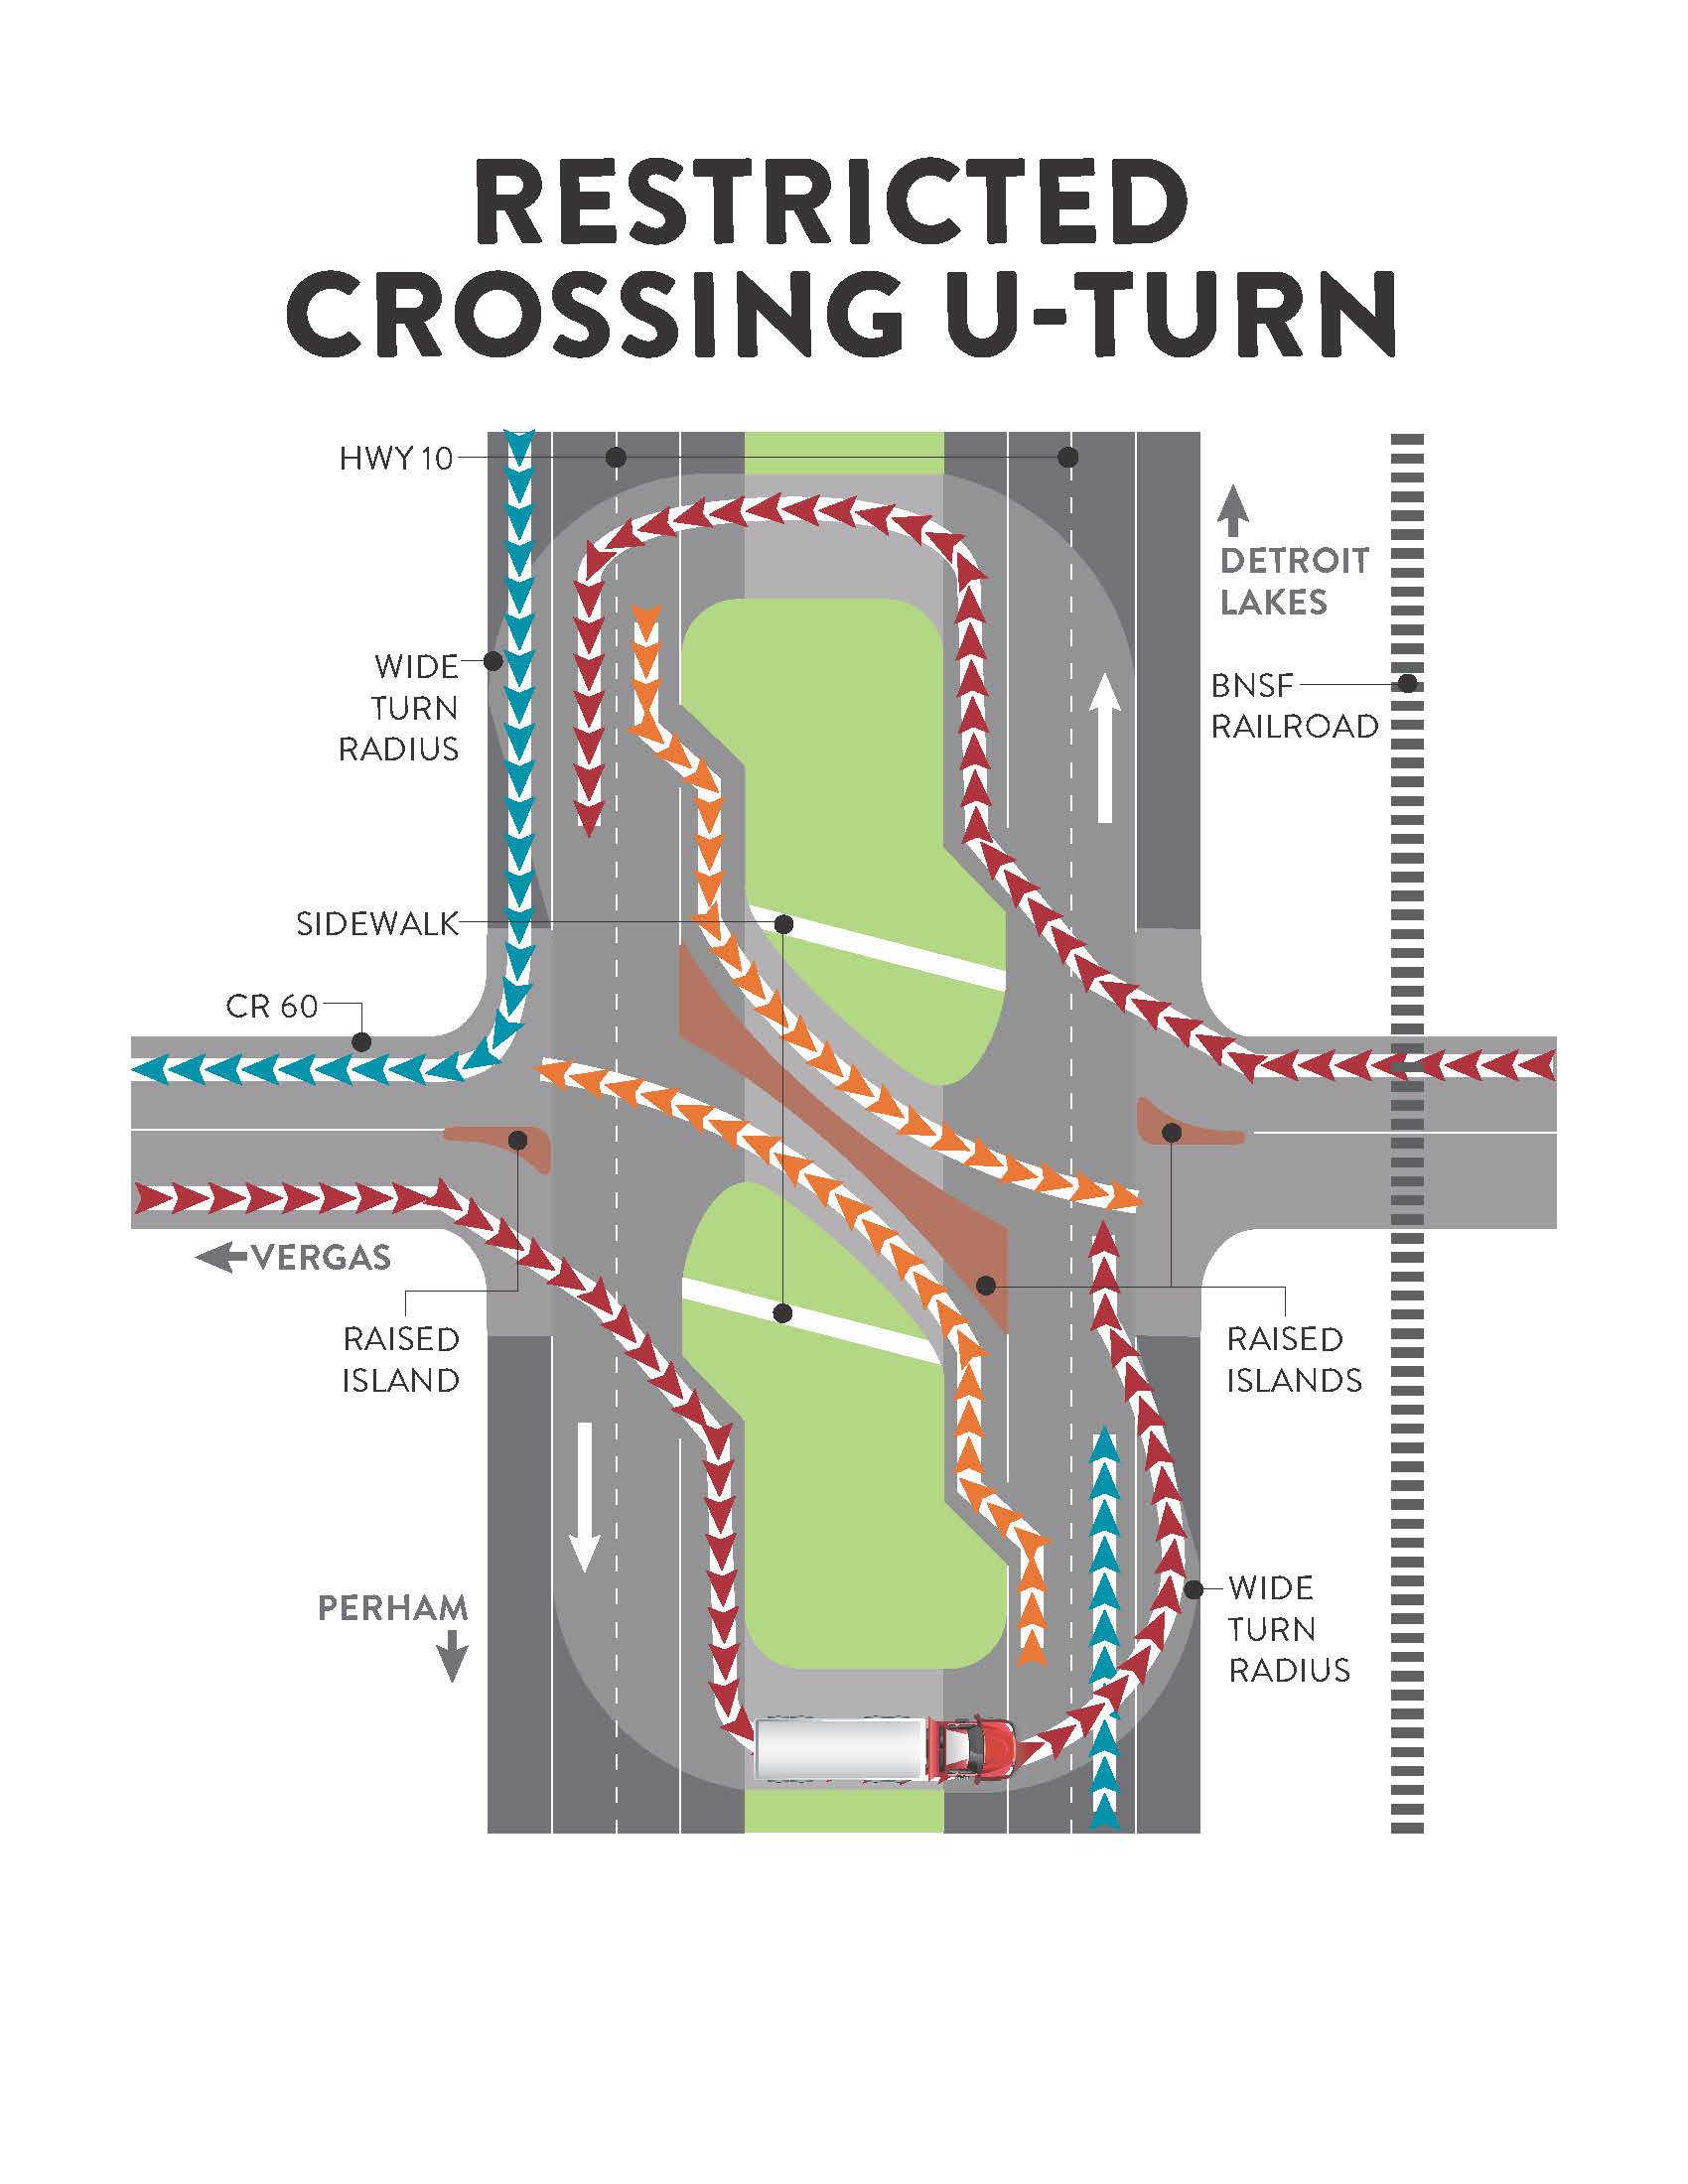 Top view of option two restricted crossing u-turn.